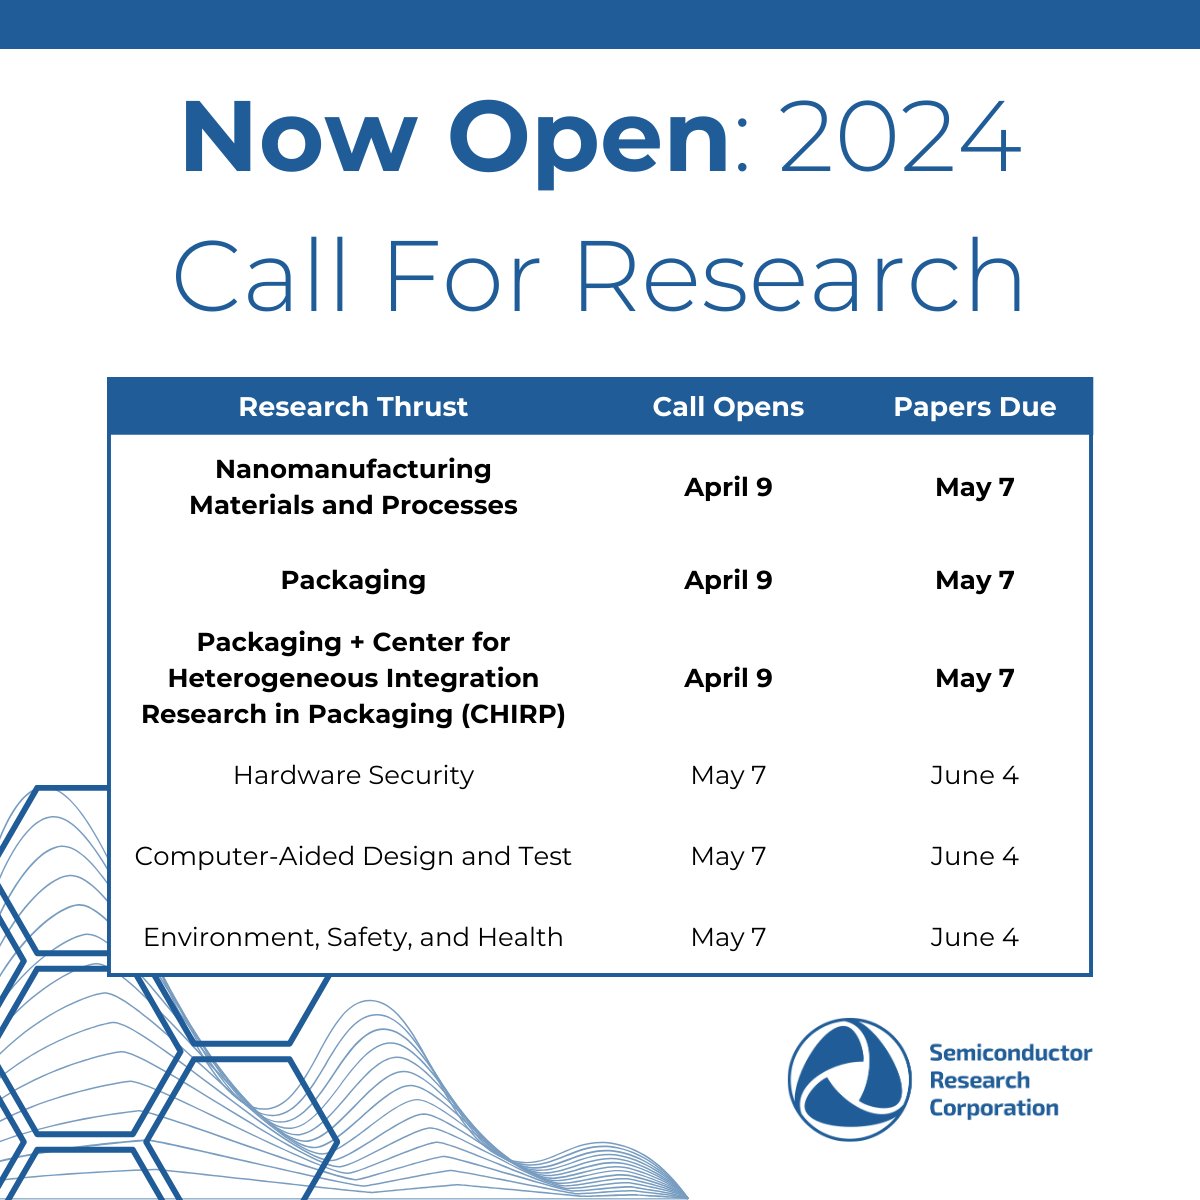 $13.8M in Funding Opportunities! The 2024 call for research is now open. View requirements here: src.org/compete/ #semiconductorresearch #semiconductors #drivingcollaborativeinnovation #innovation #technology #semiconductorindustry